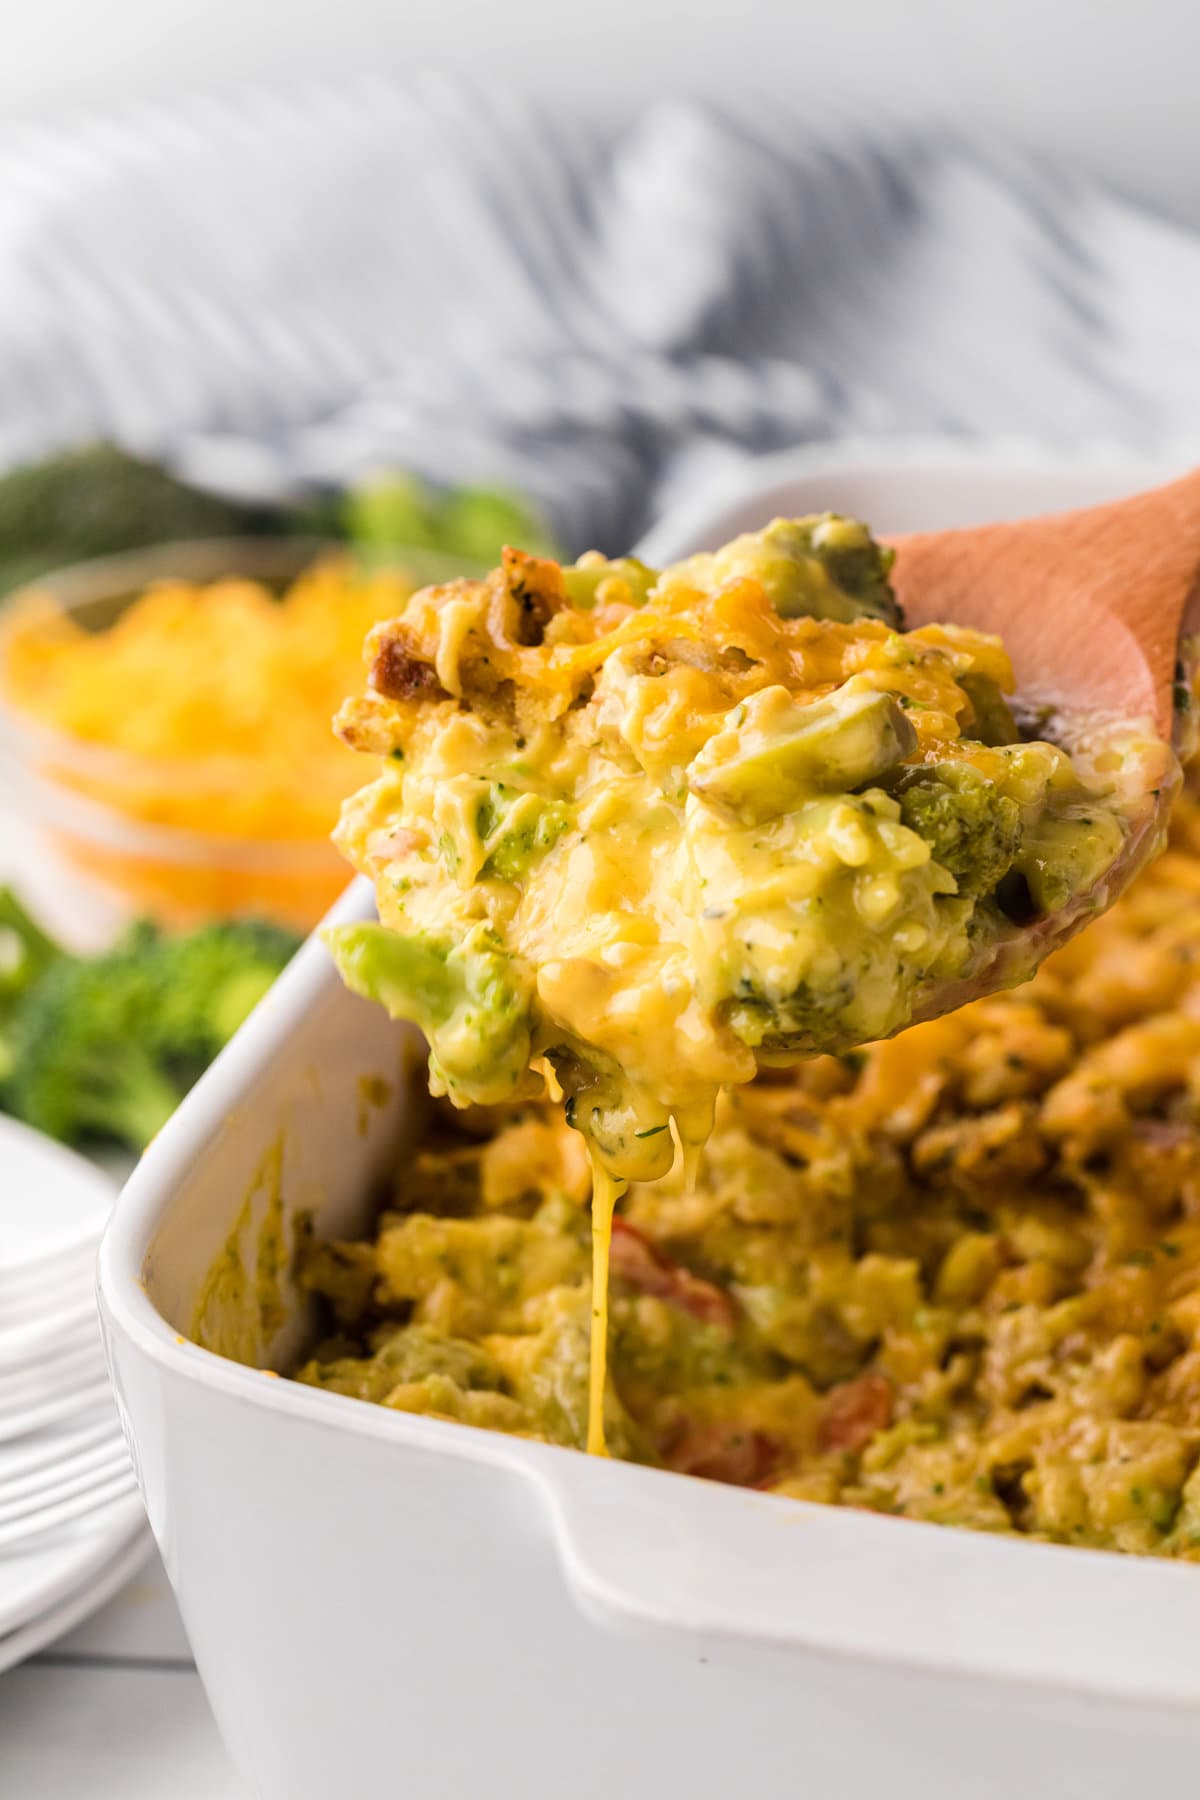 A wooden spoon scooping a portion of cheesy broccoli with stuffing out of a casserole dish.